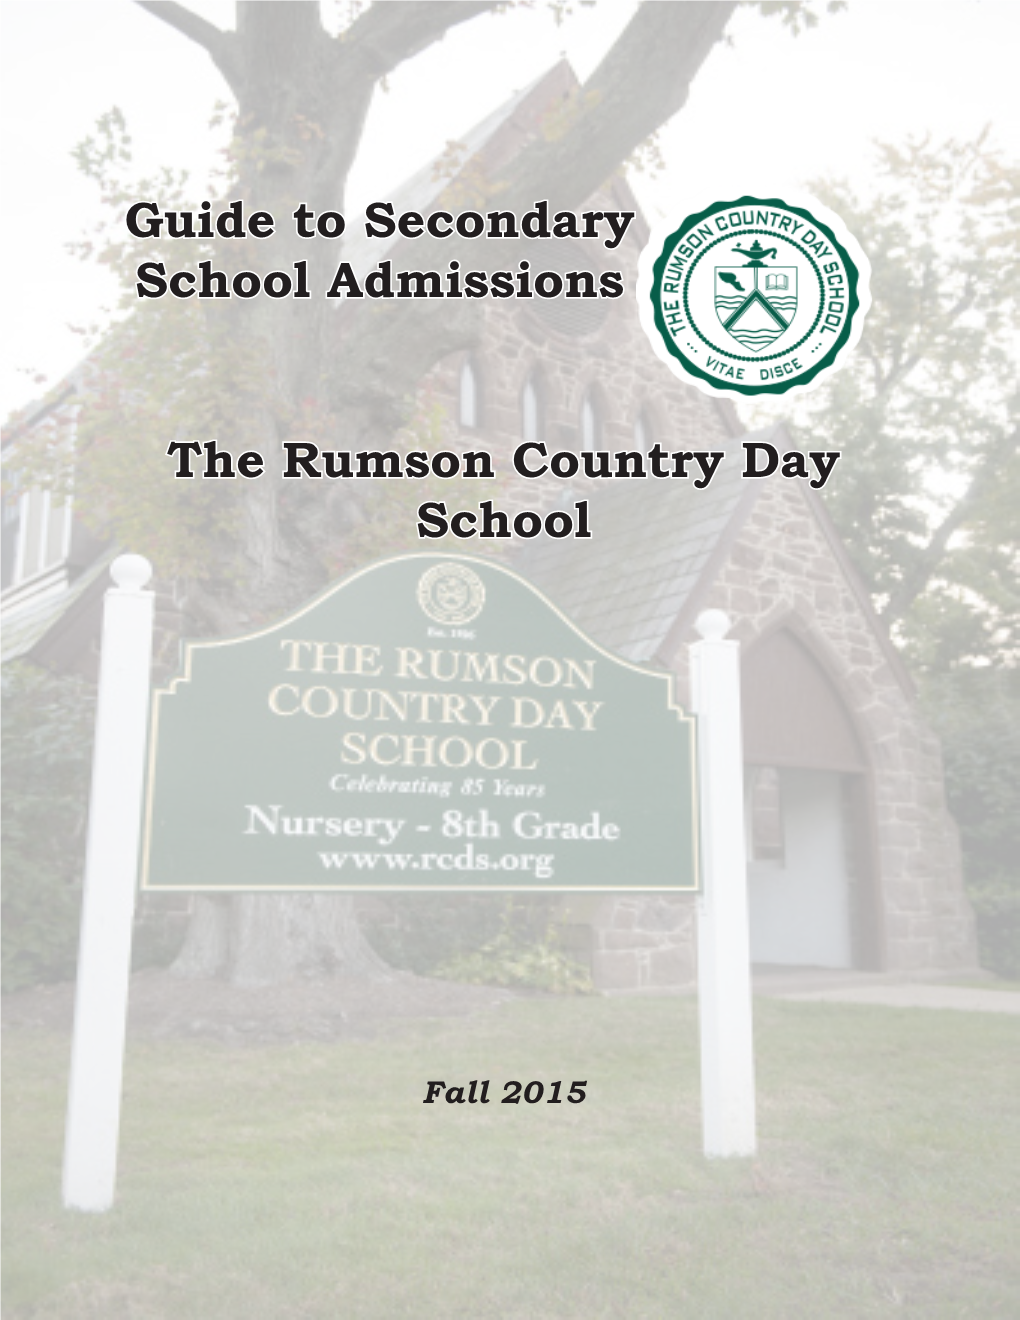 Guide to Secondary School Admissions the Rumson Country Day School